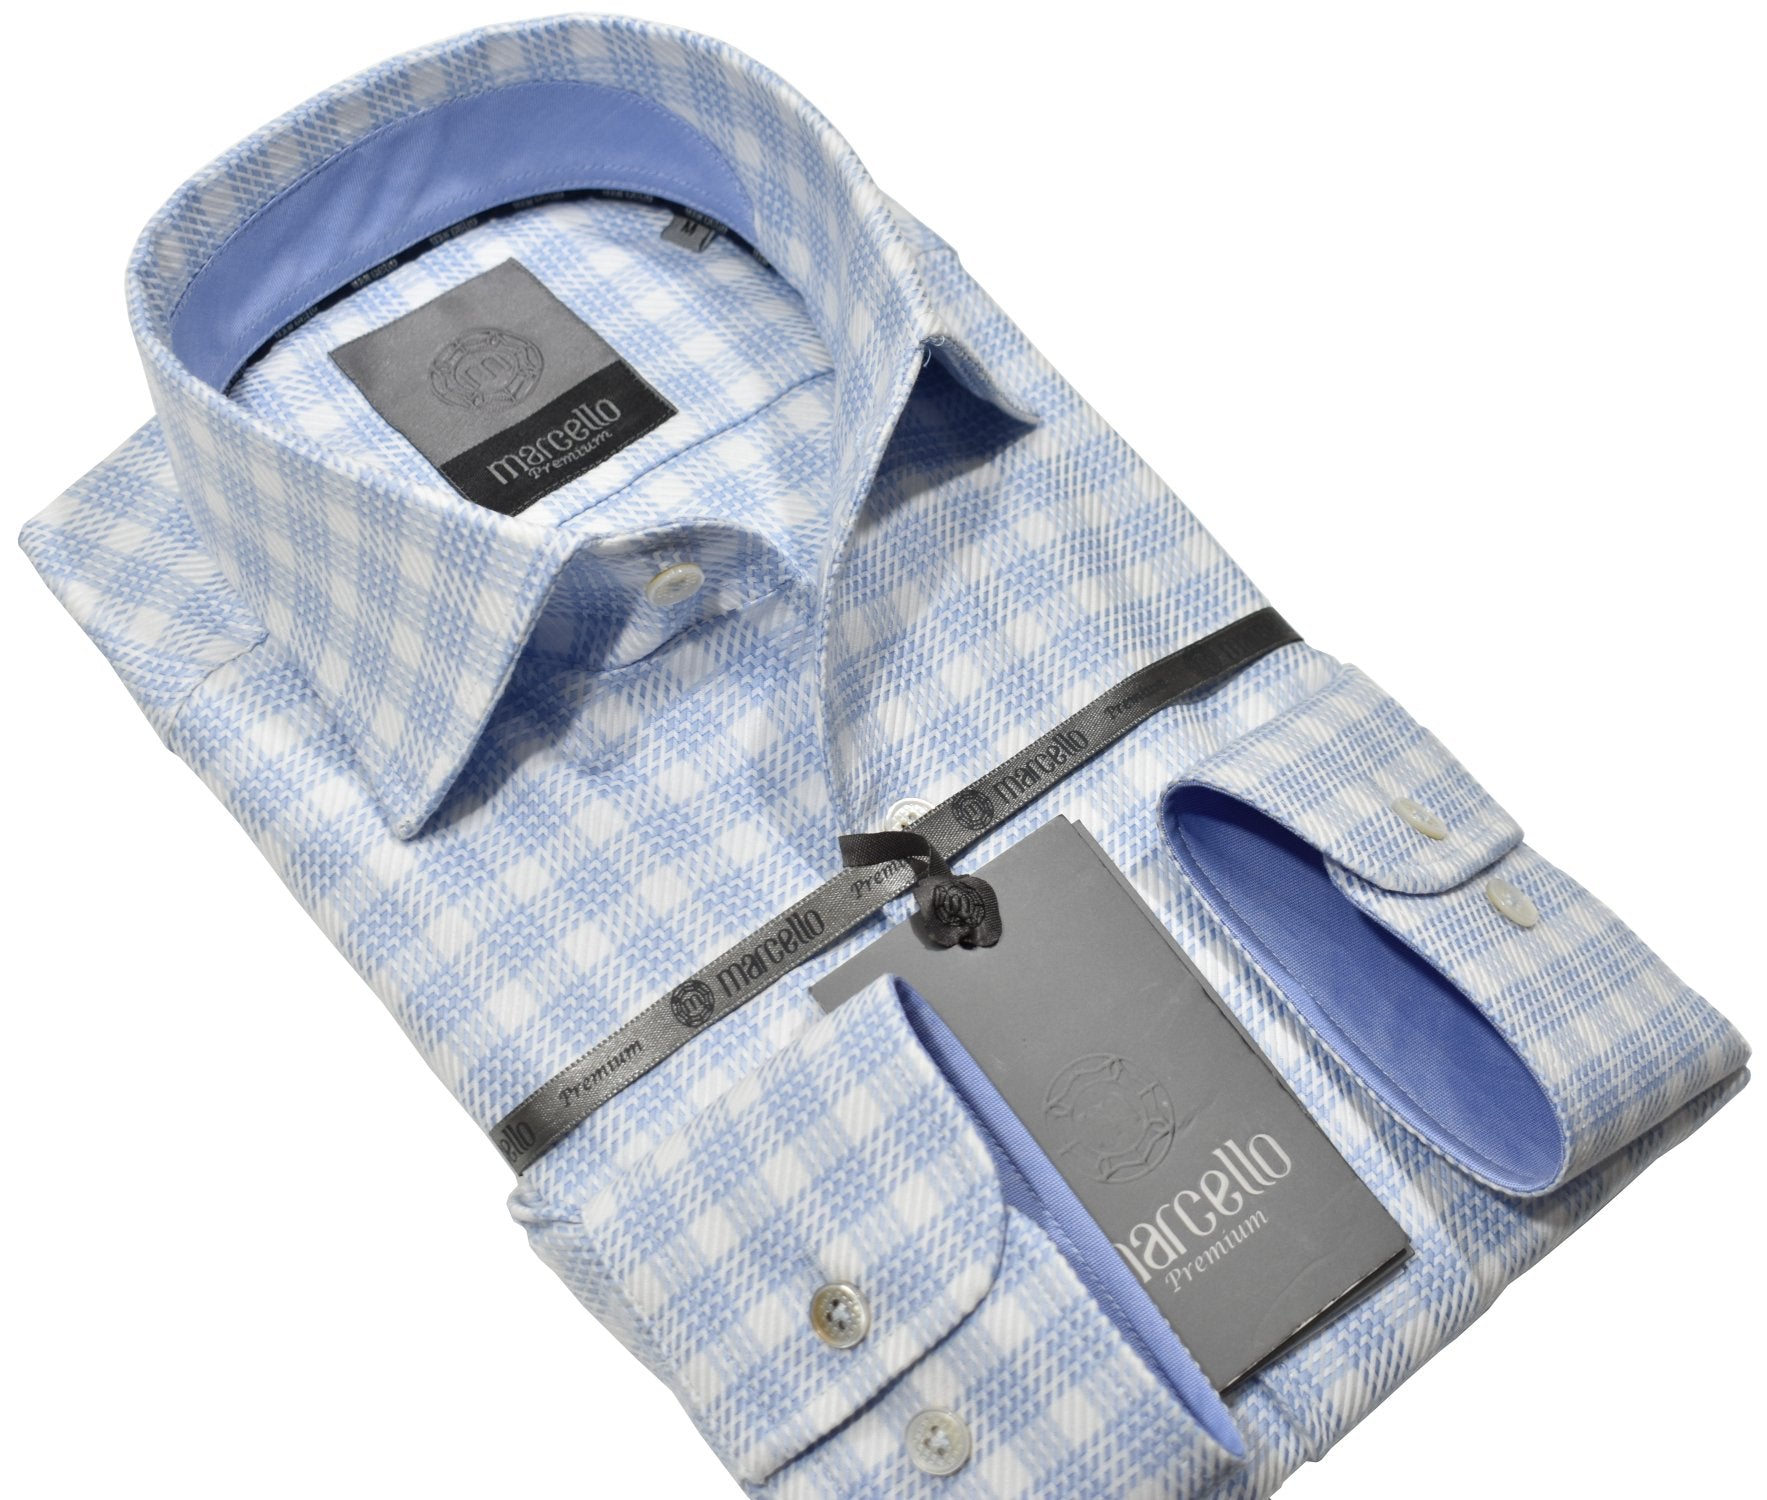 Elevate your wardrobe with the Marcello Premium Sky Plaid shirt. Crafted from extra fine fabrics sourced from fine Italian mills, our Marcello Premium program offers 100's 2 ply shirts in rich classic patterns. With the Marcello exclusive one piece roll collar, you'll feel confident and stylish in any setting.